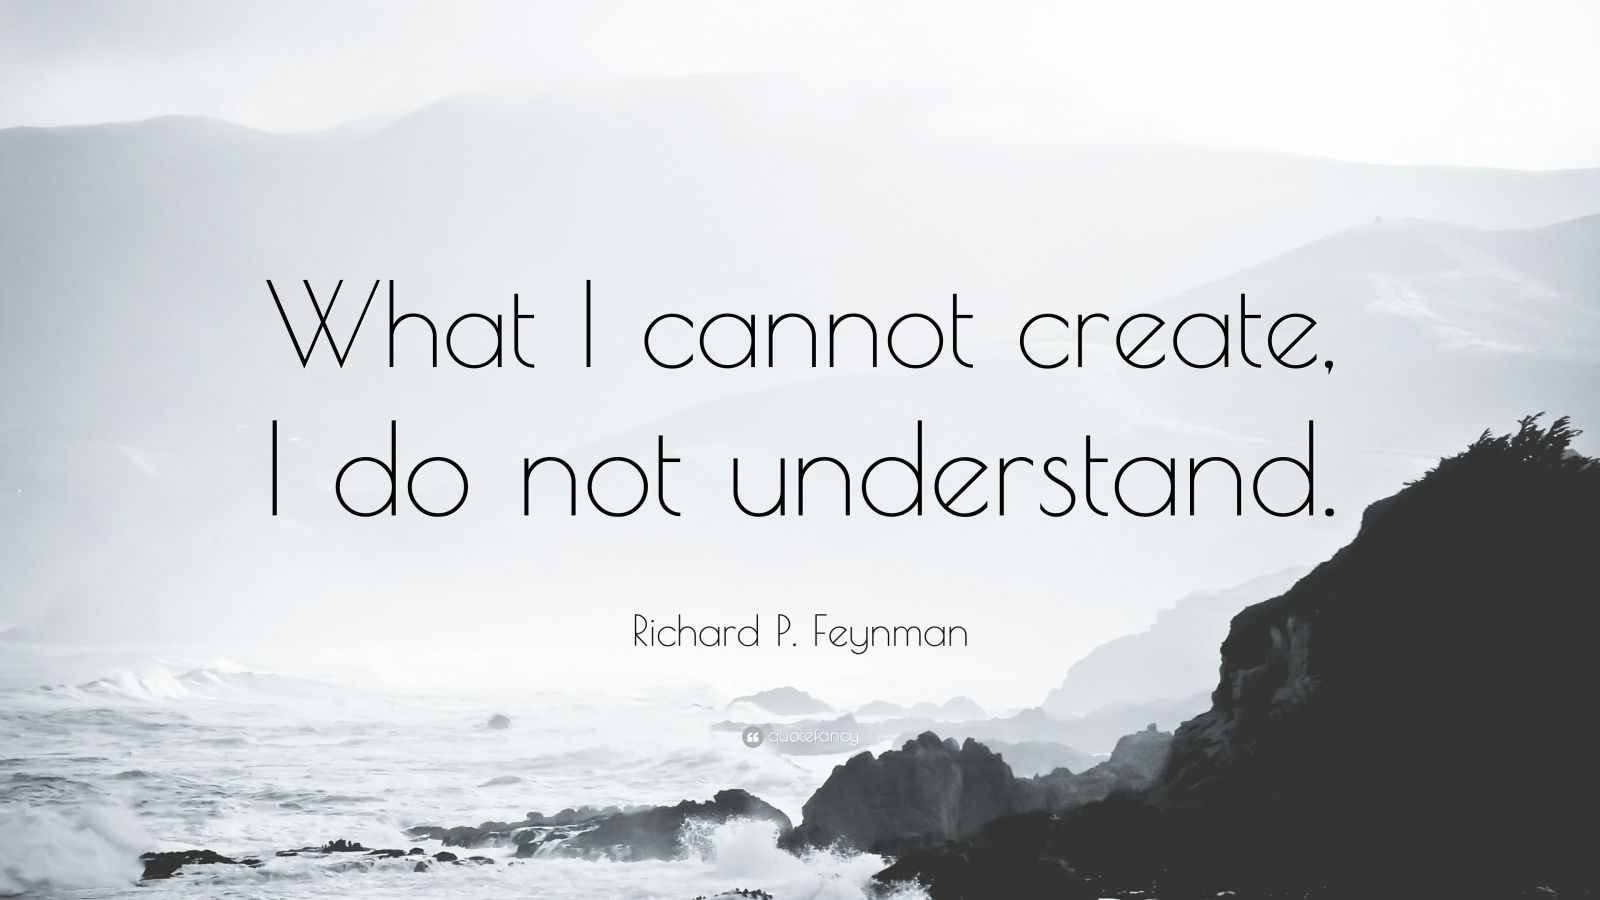 Richard P. Feynman Quote: “What I cannot create, I do not